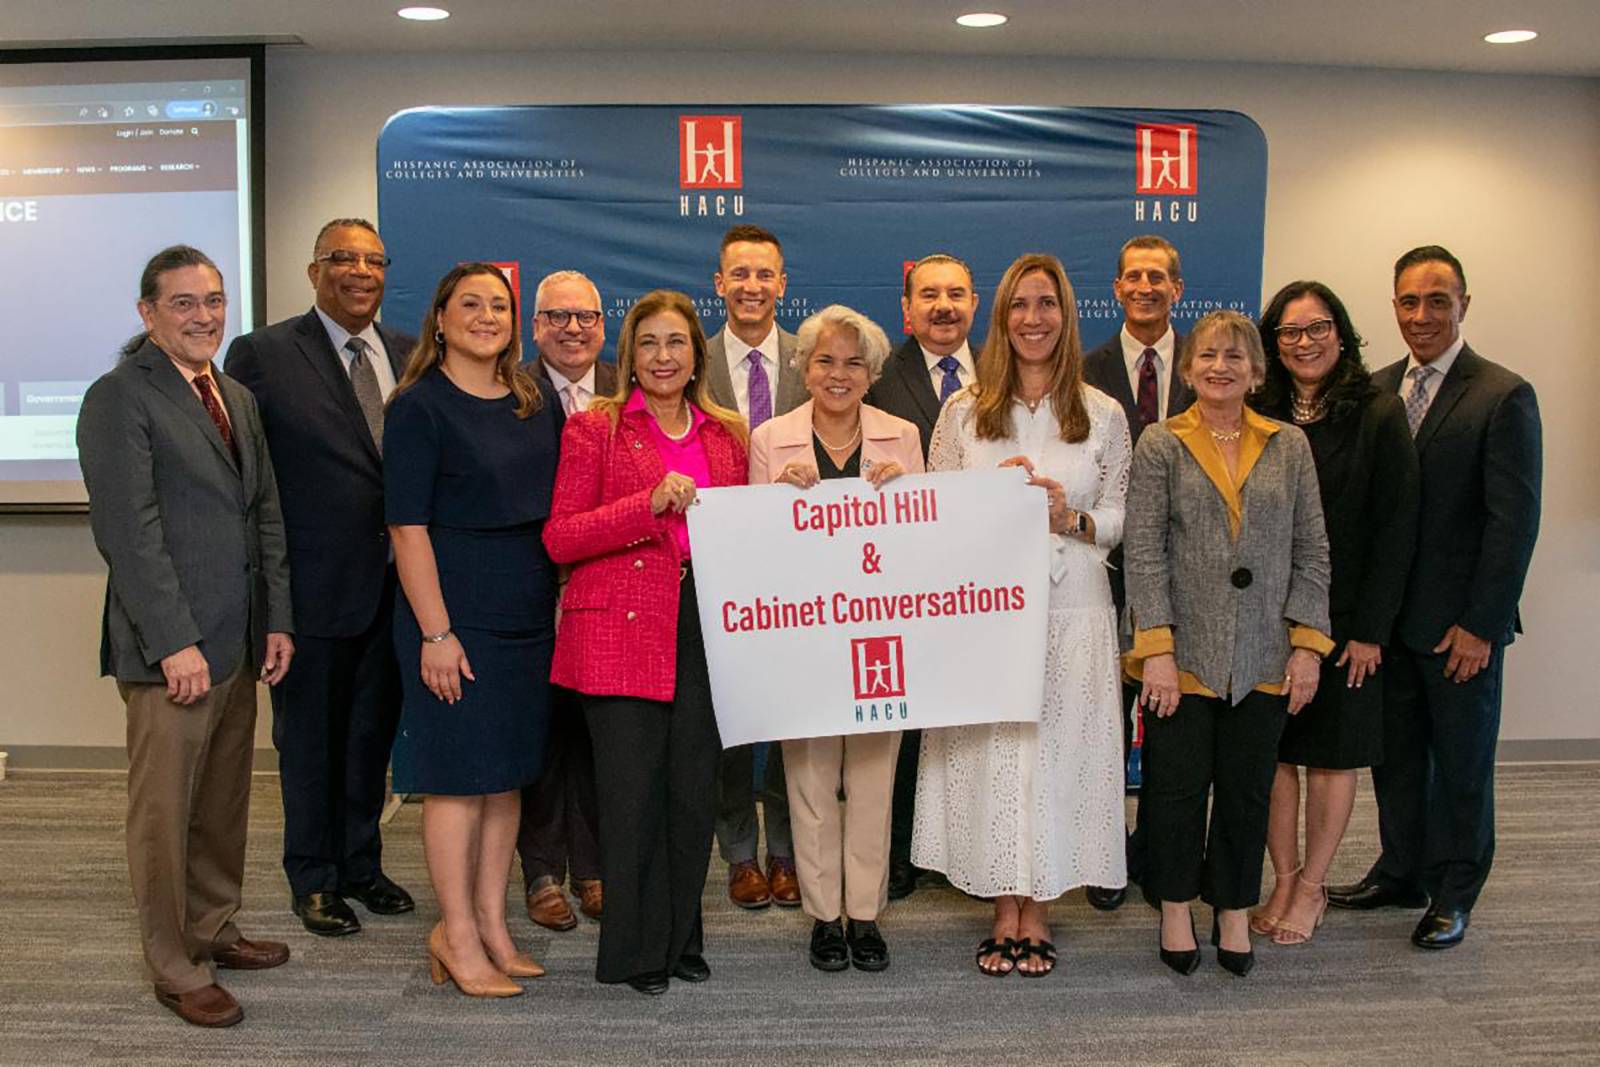 Hudson County Community College President Dr. Christopher Reber (fourth from left) is pictured here with other participants of the HACU “Capitol Hill & Cabinet Conversations” event in Washington, D.C.